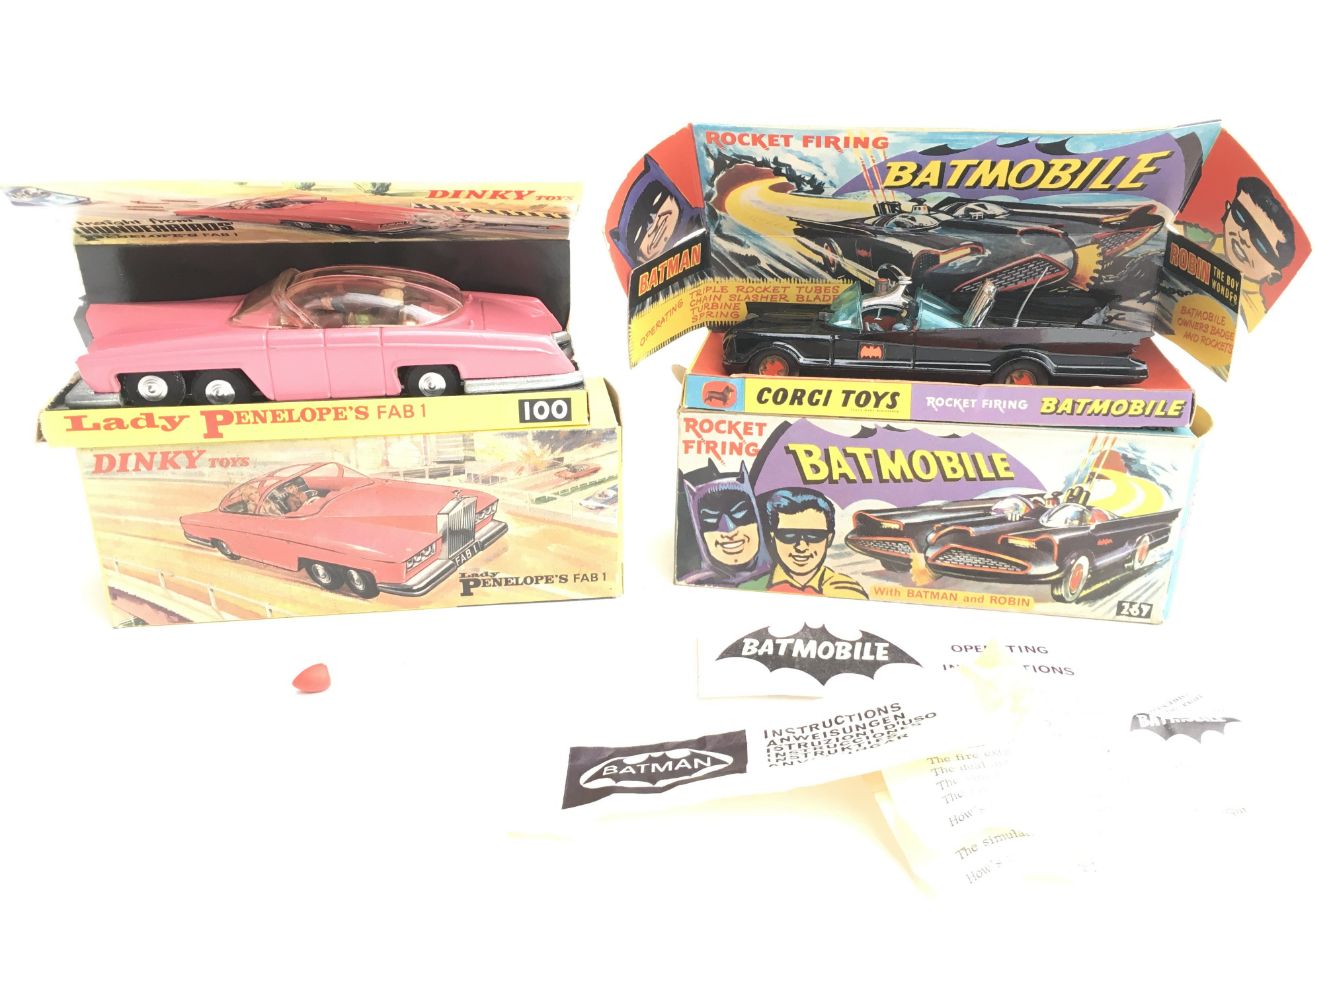 Specialist Toy Sale - catalogue not yet finalised